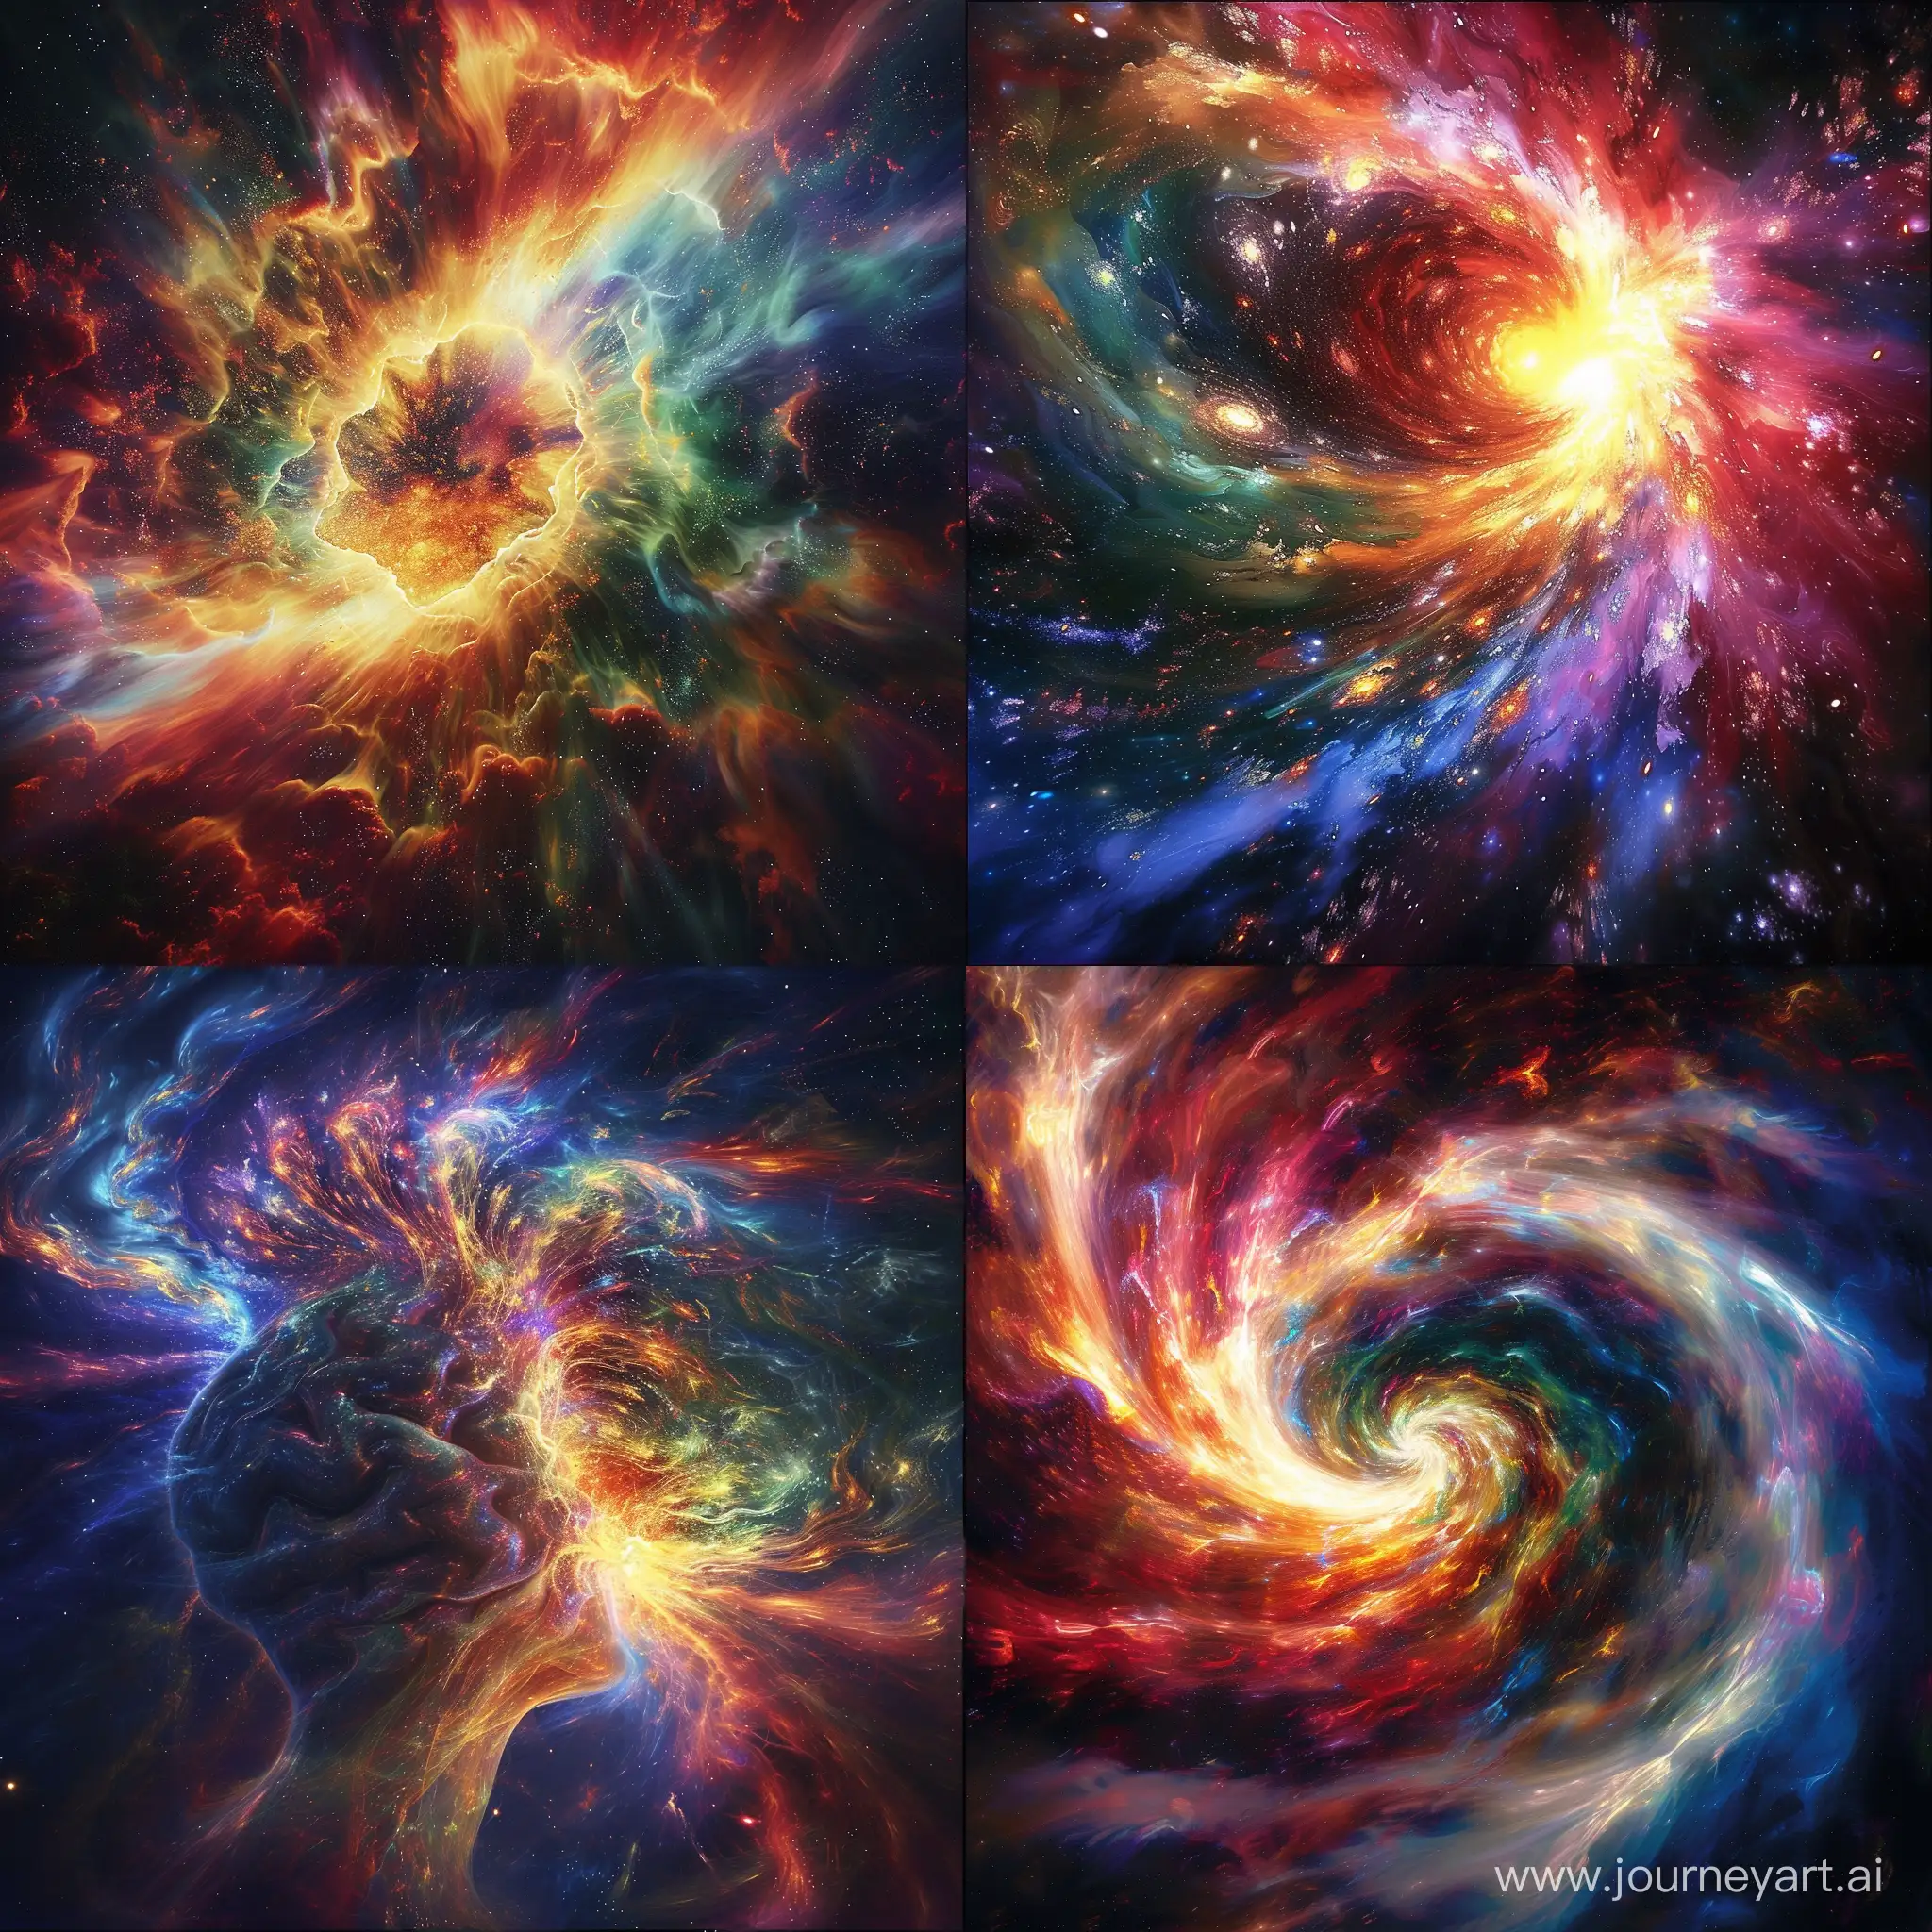 a breathtaking, incredibly detailed image of a vast and magnificent cosmic brain radiating brilliant, otherworldly colors from the heart of the cosmos. Let the swirling cosmic hues blend seamlessly and exude a sense of wonder and awe, captivating the viewer with the immensity and beauty of the universe encapsulated within this celestial brain --q 5